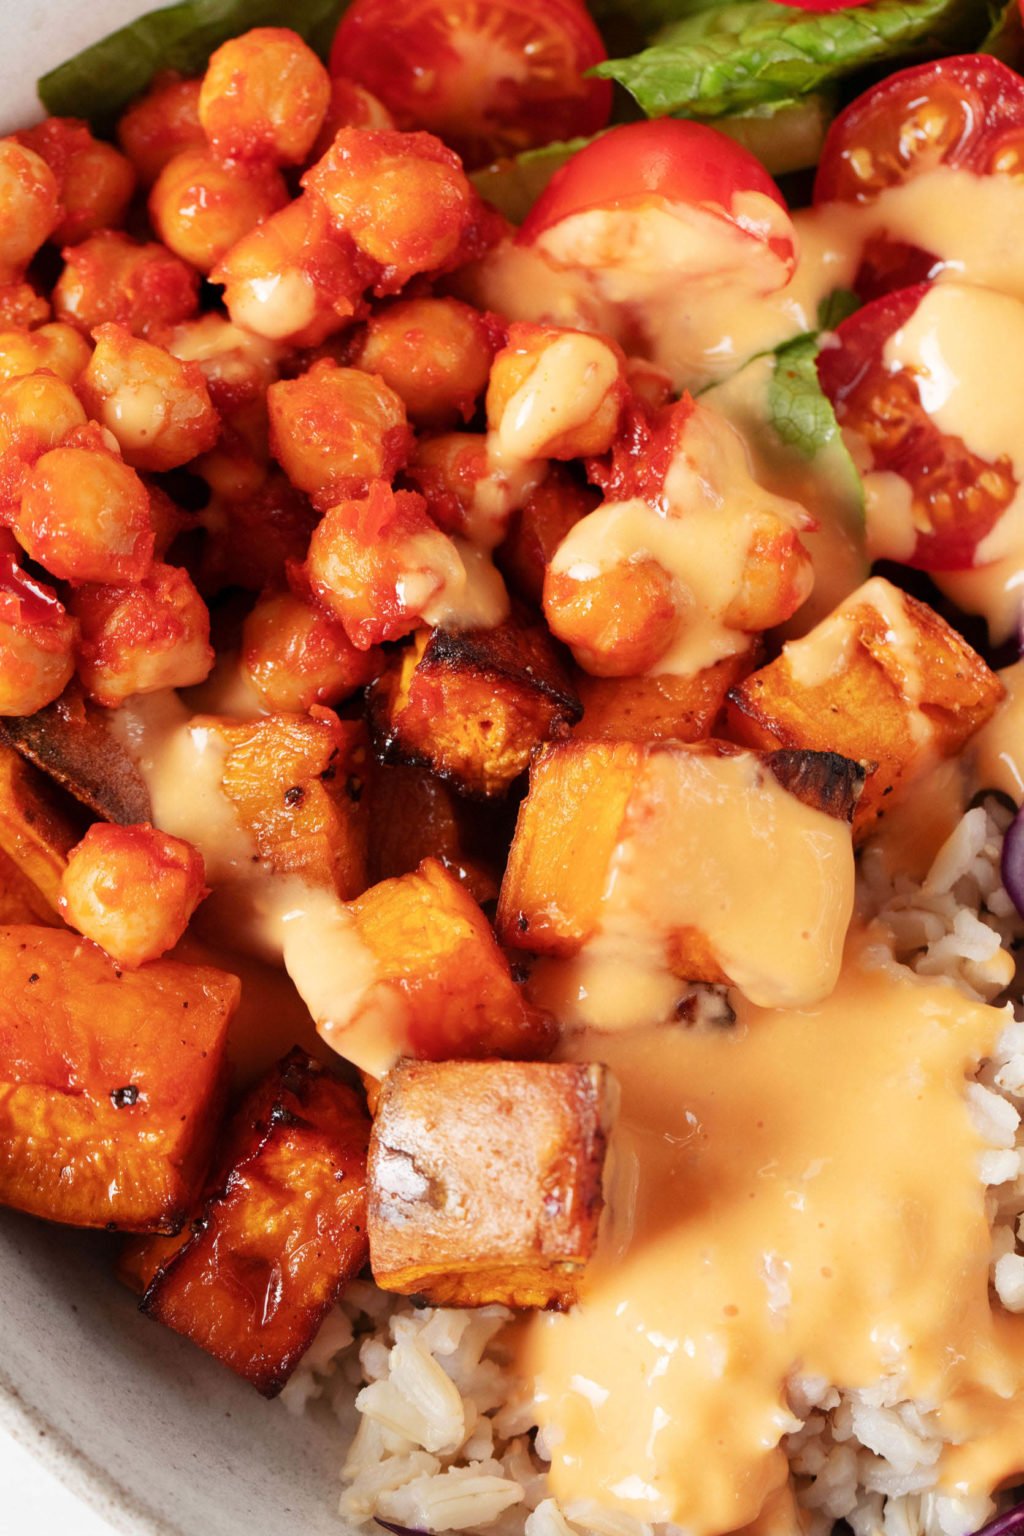 A zoomed in, overhead image of roasted sweet potatoes and chickpeas that have been smothered in a creamy, light orange colored sauce. 